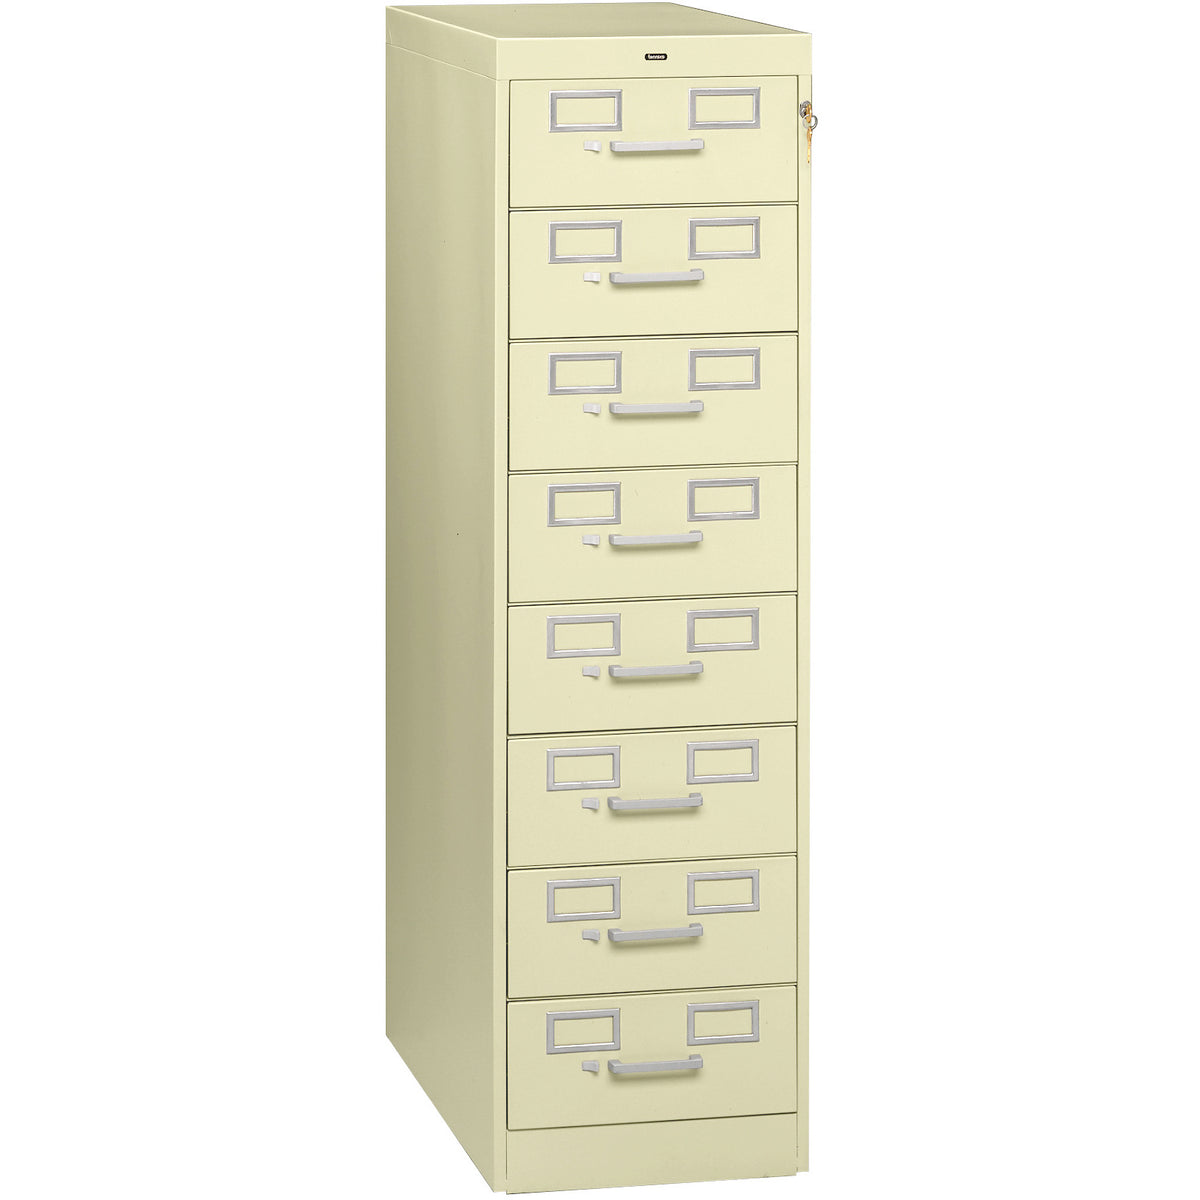 Tennsco 52" High Card File with Eight Drawers, CF-846